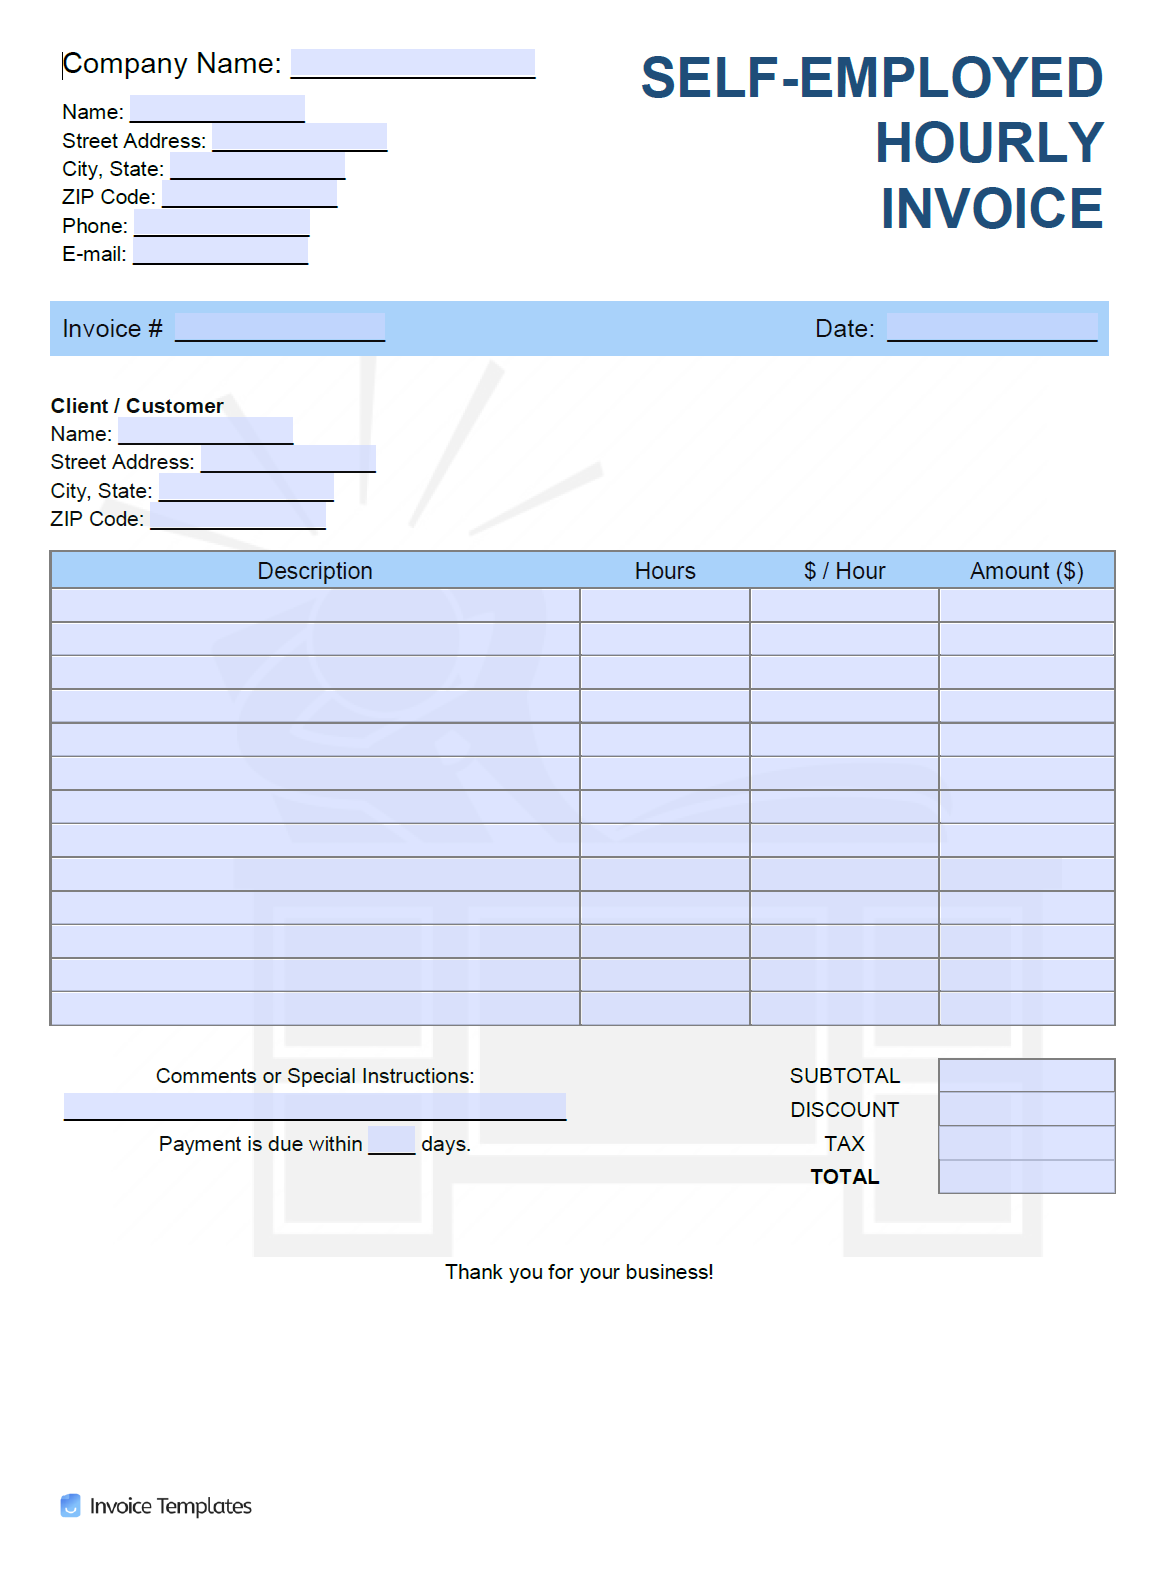 Invoice Template For Independent Contractor